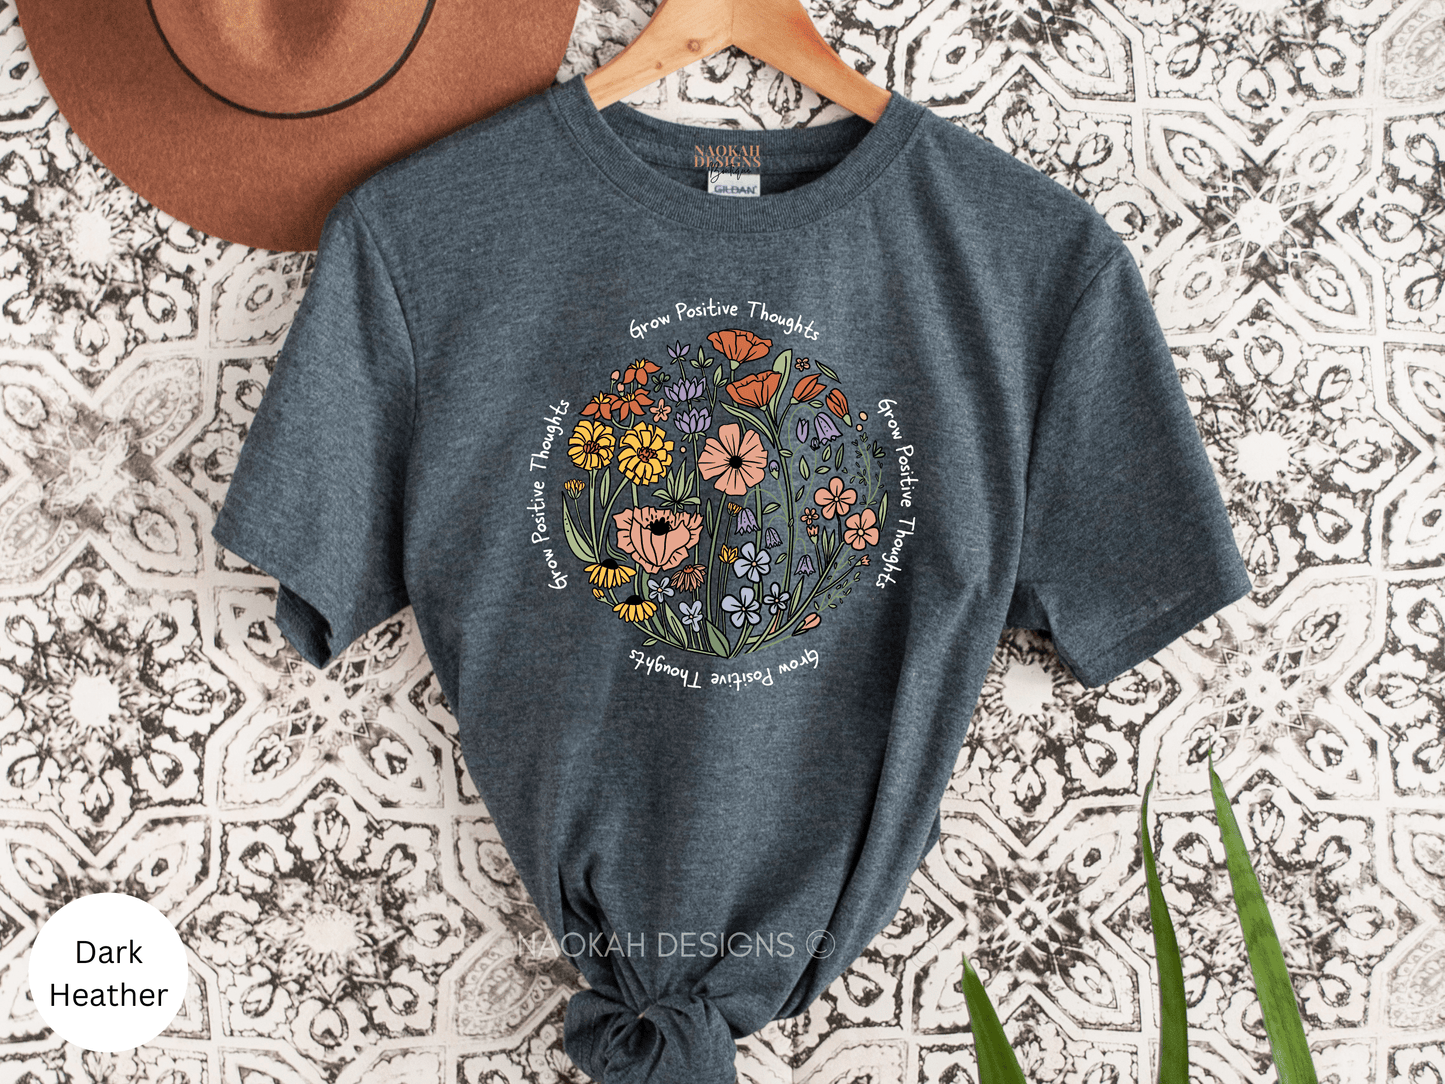 grow positive thoughts wildflower shirt, wildflower shirt, flower gift, floral design, cute flower, flower lover gift, wild flowers shirt, floral tshirt, flower shirt, gift for women, ladies shirts, best friend gift, grow positive thoughts